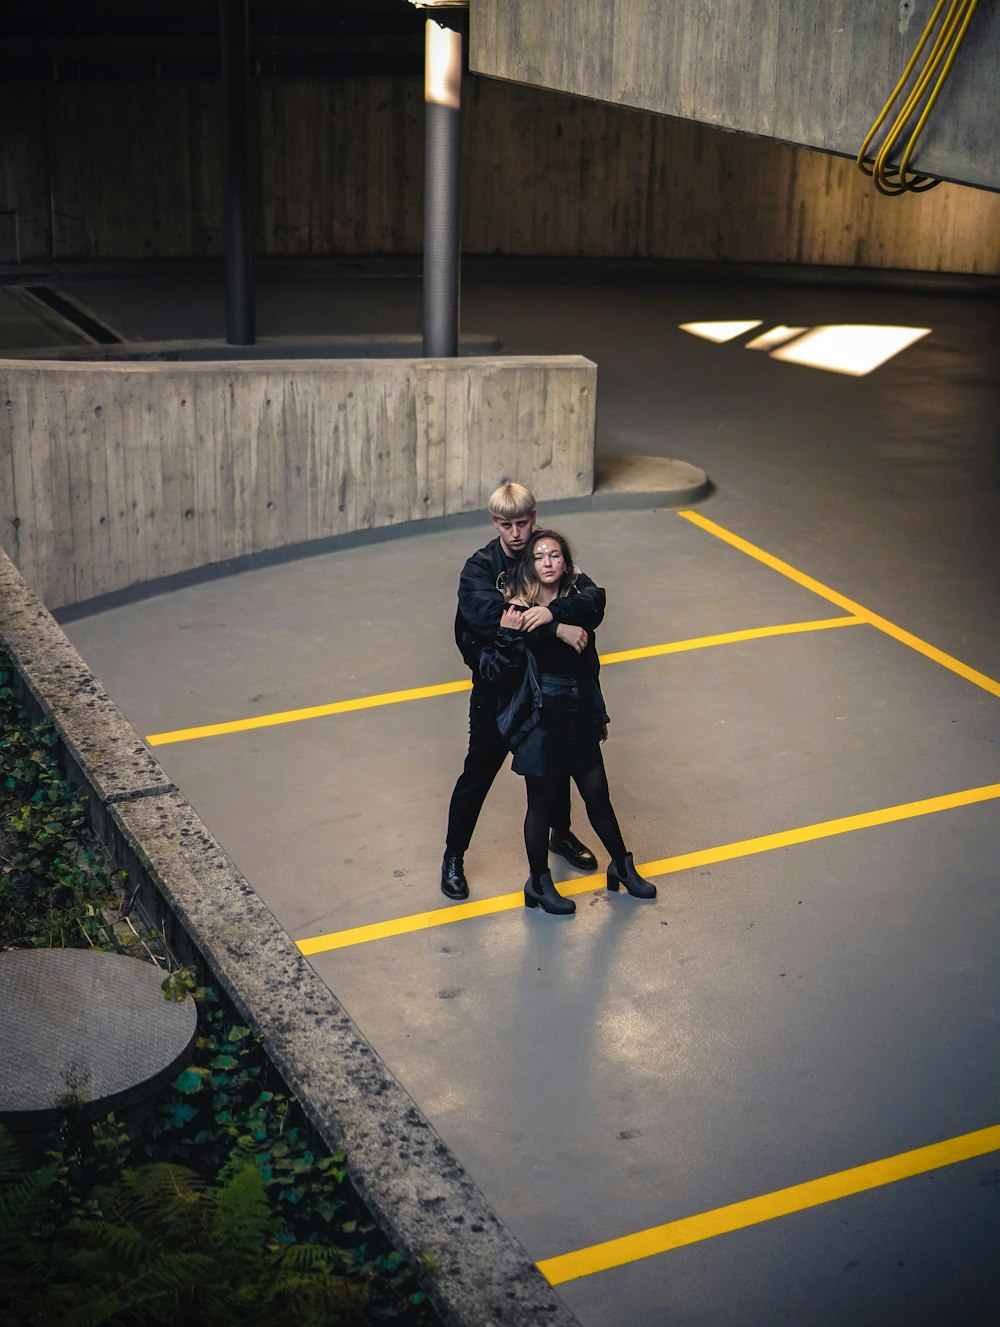 man about to hug woman standing on yellow and black parking lot